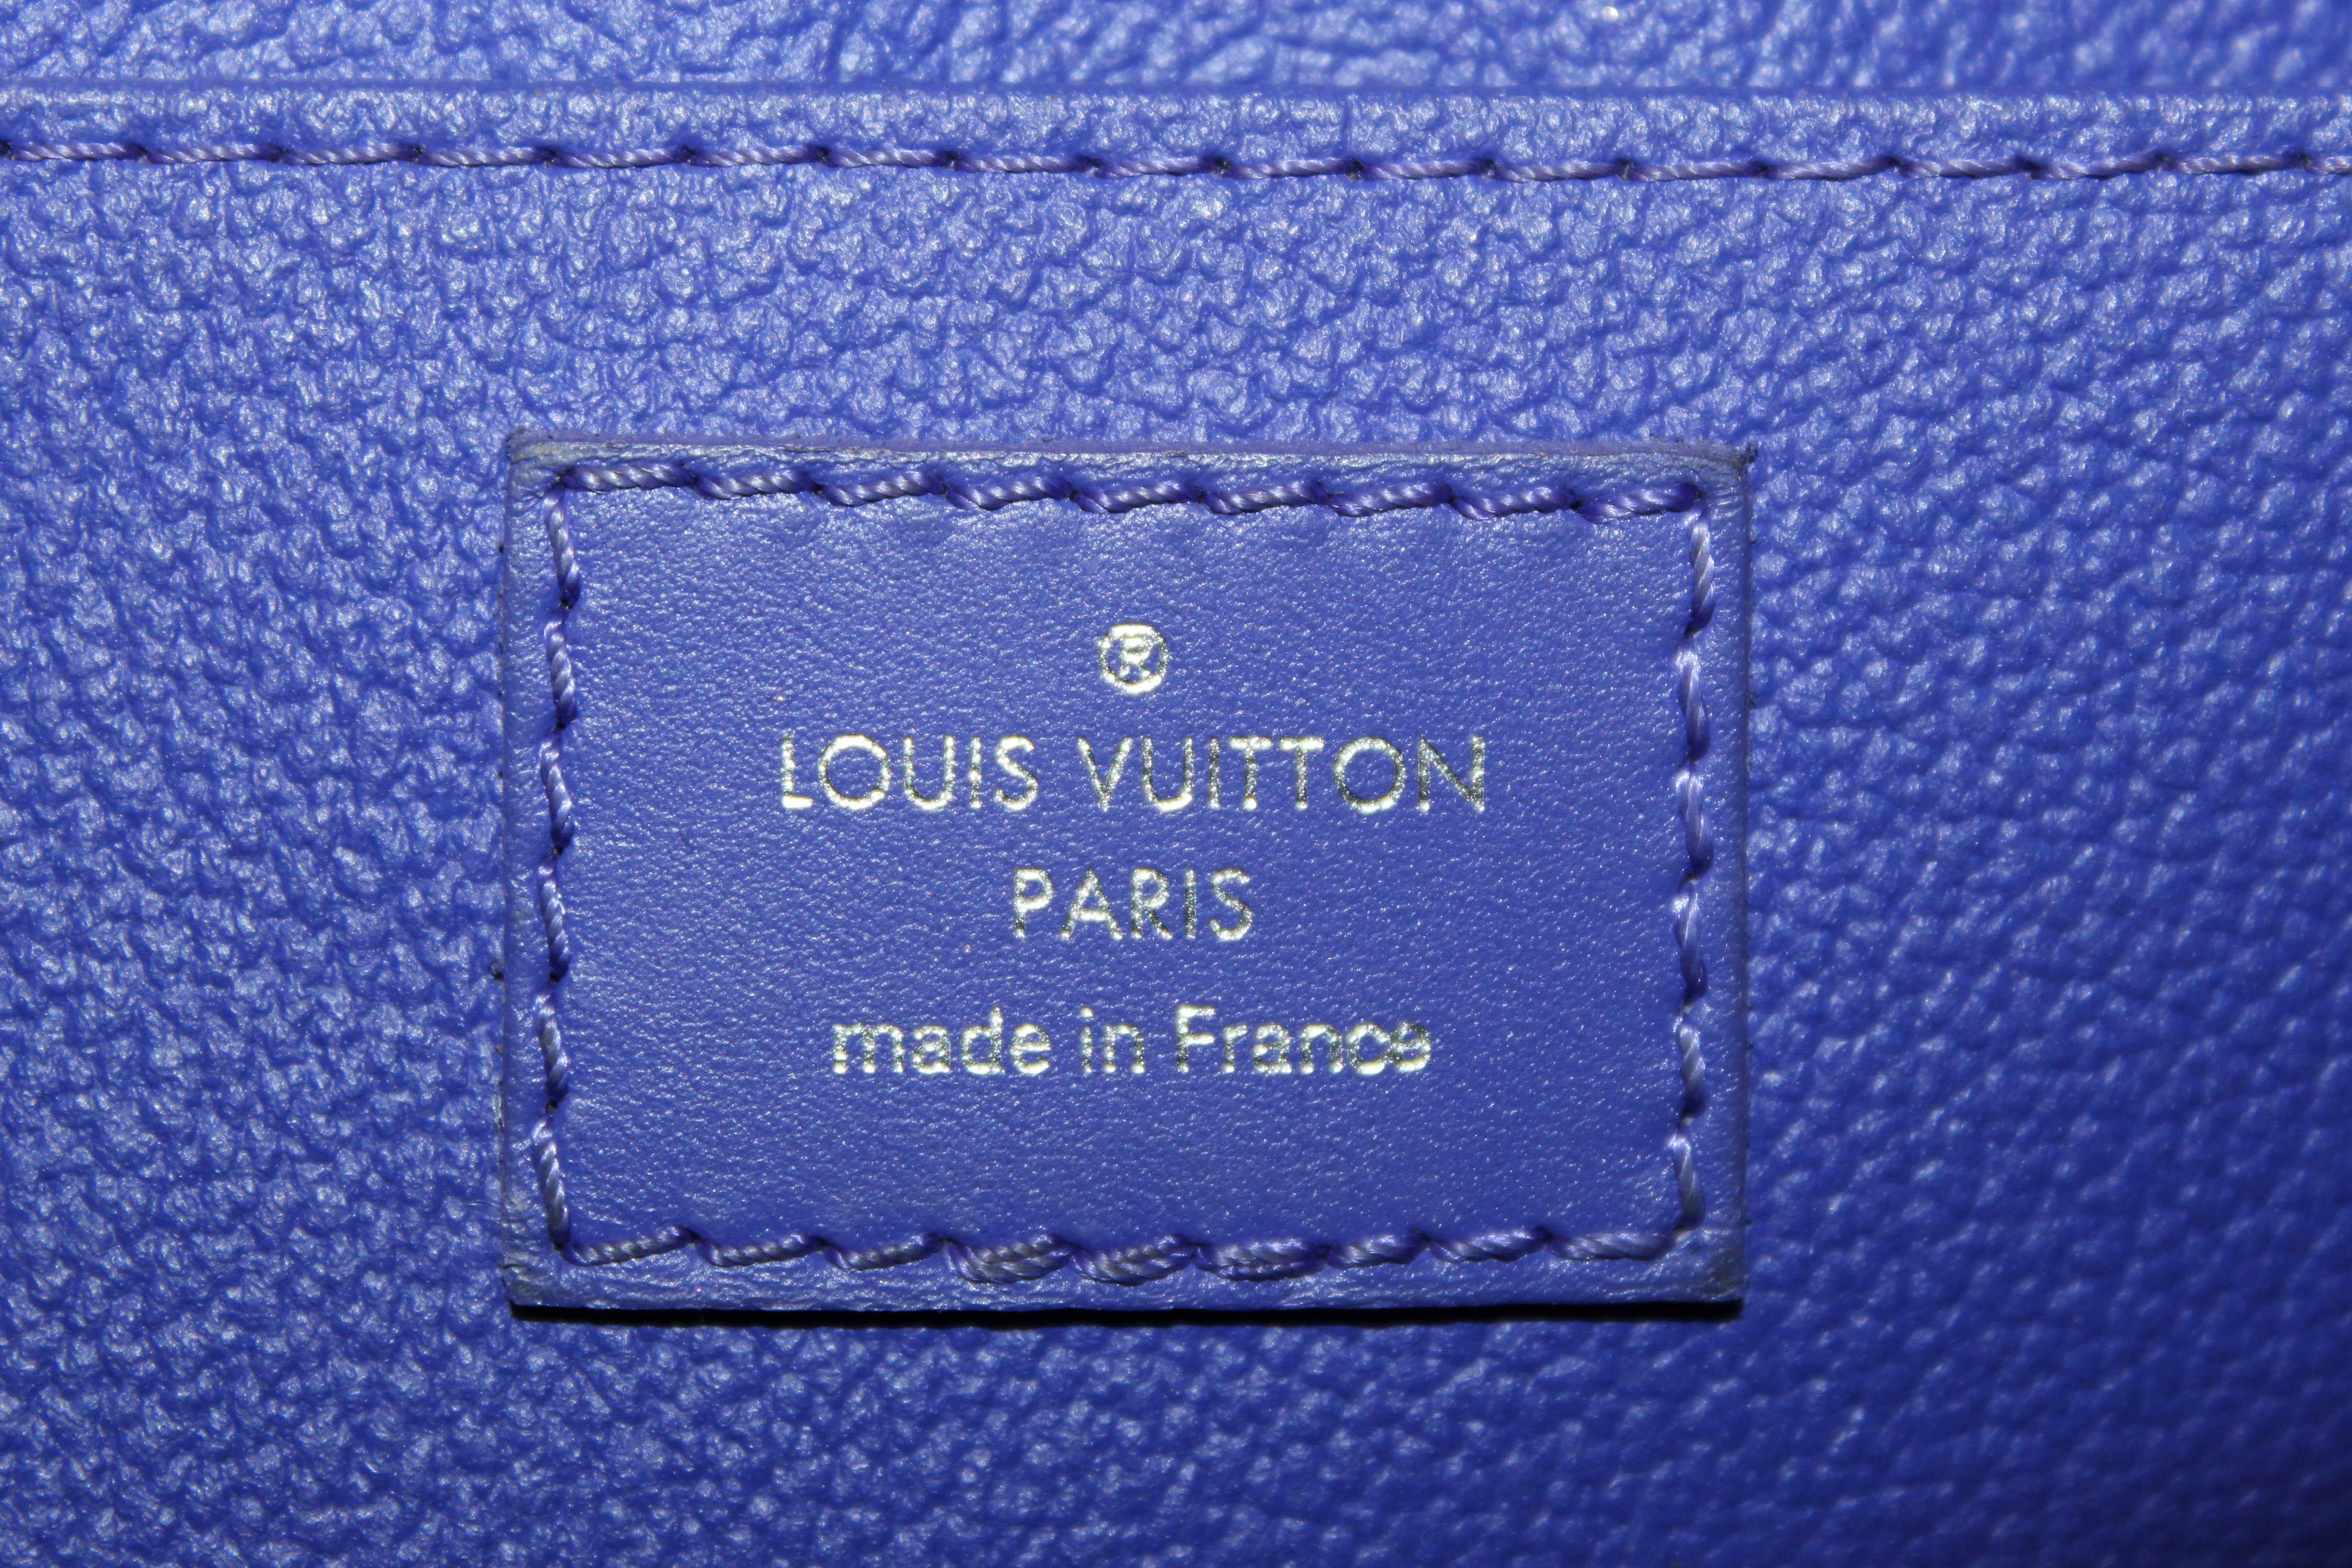 Authentic Louis Vuitton Blue Epi Leather Toiletry 26 Pouch – Italy